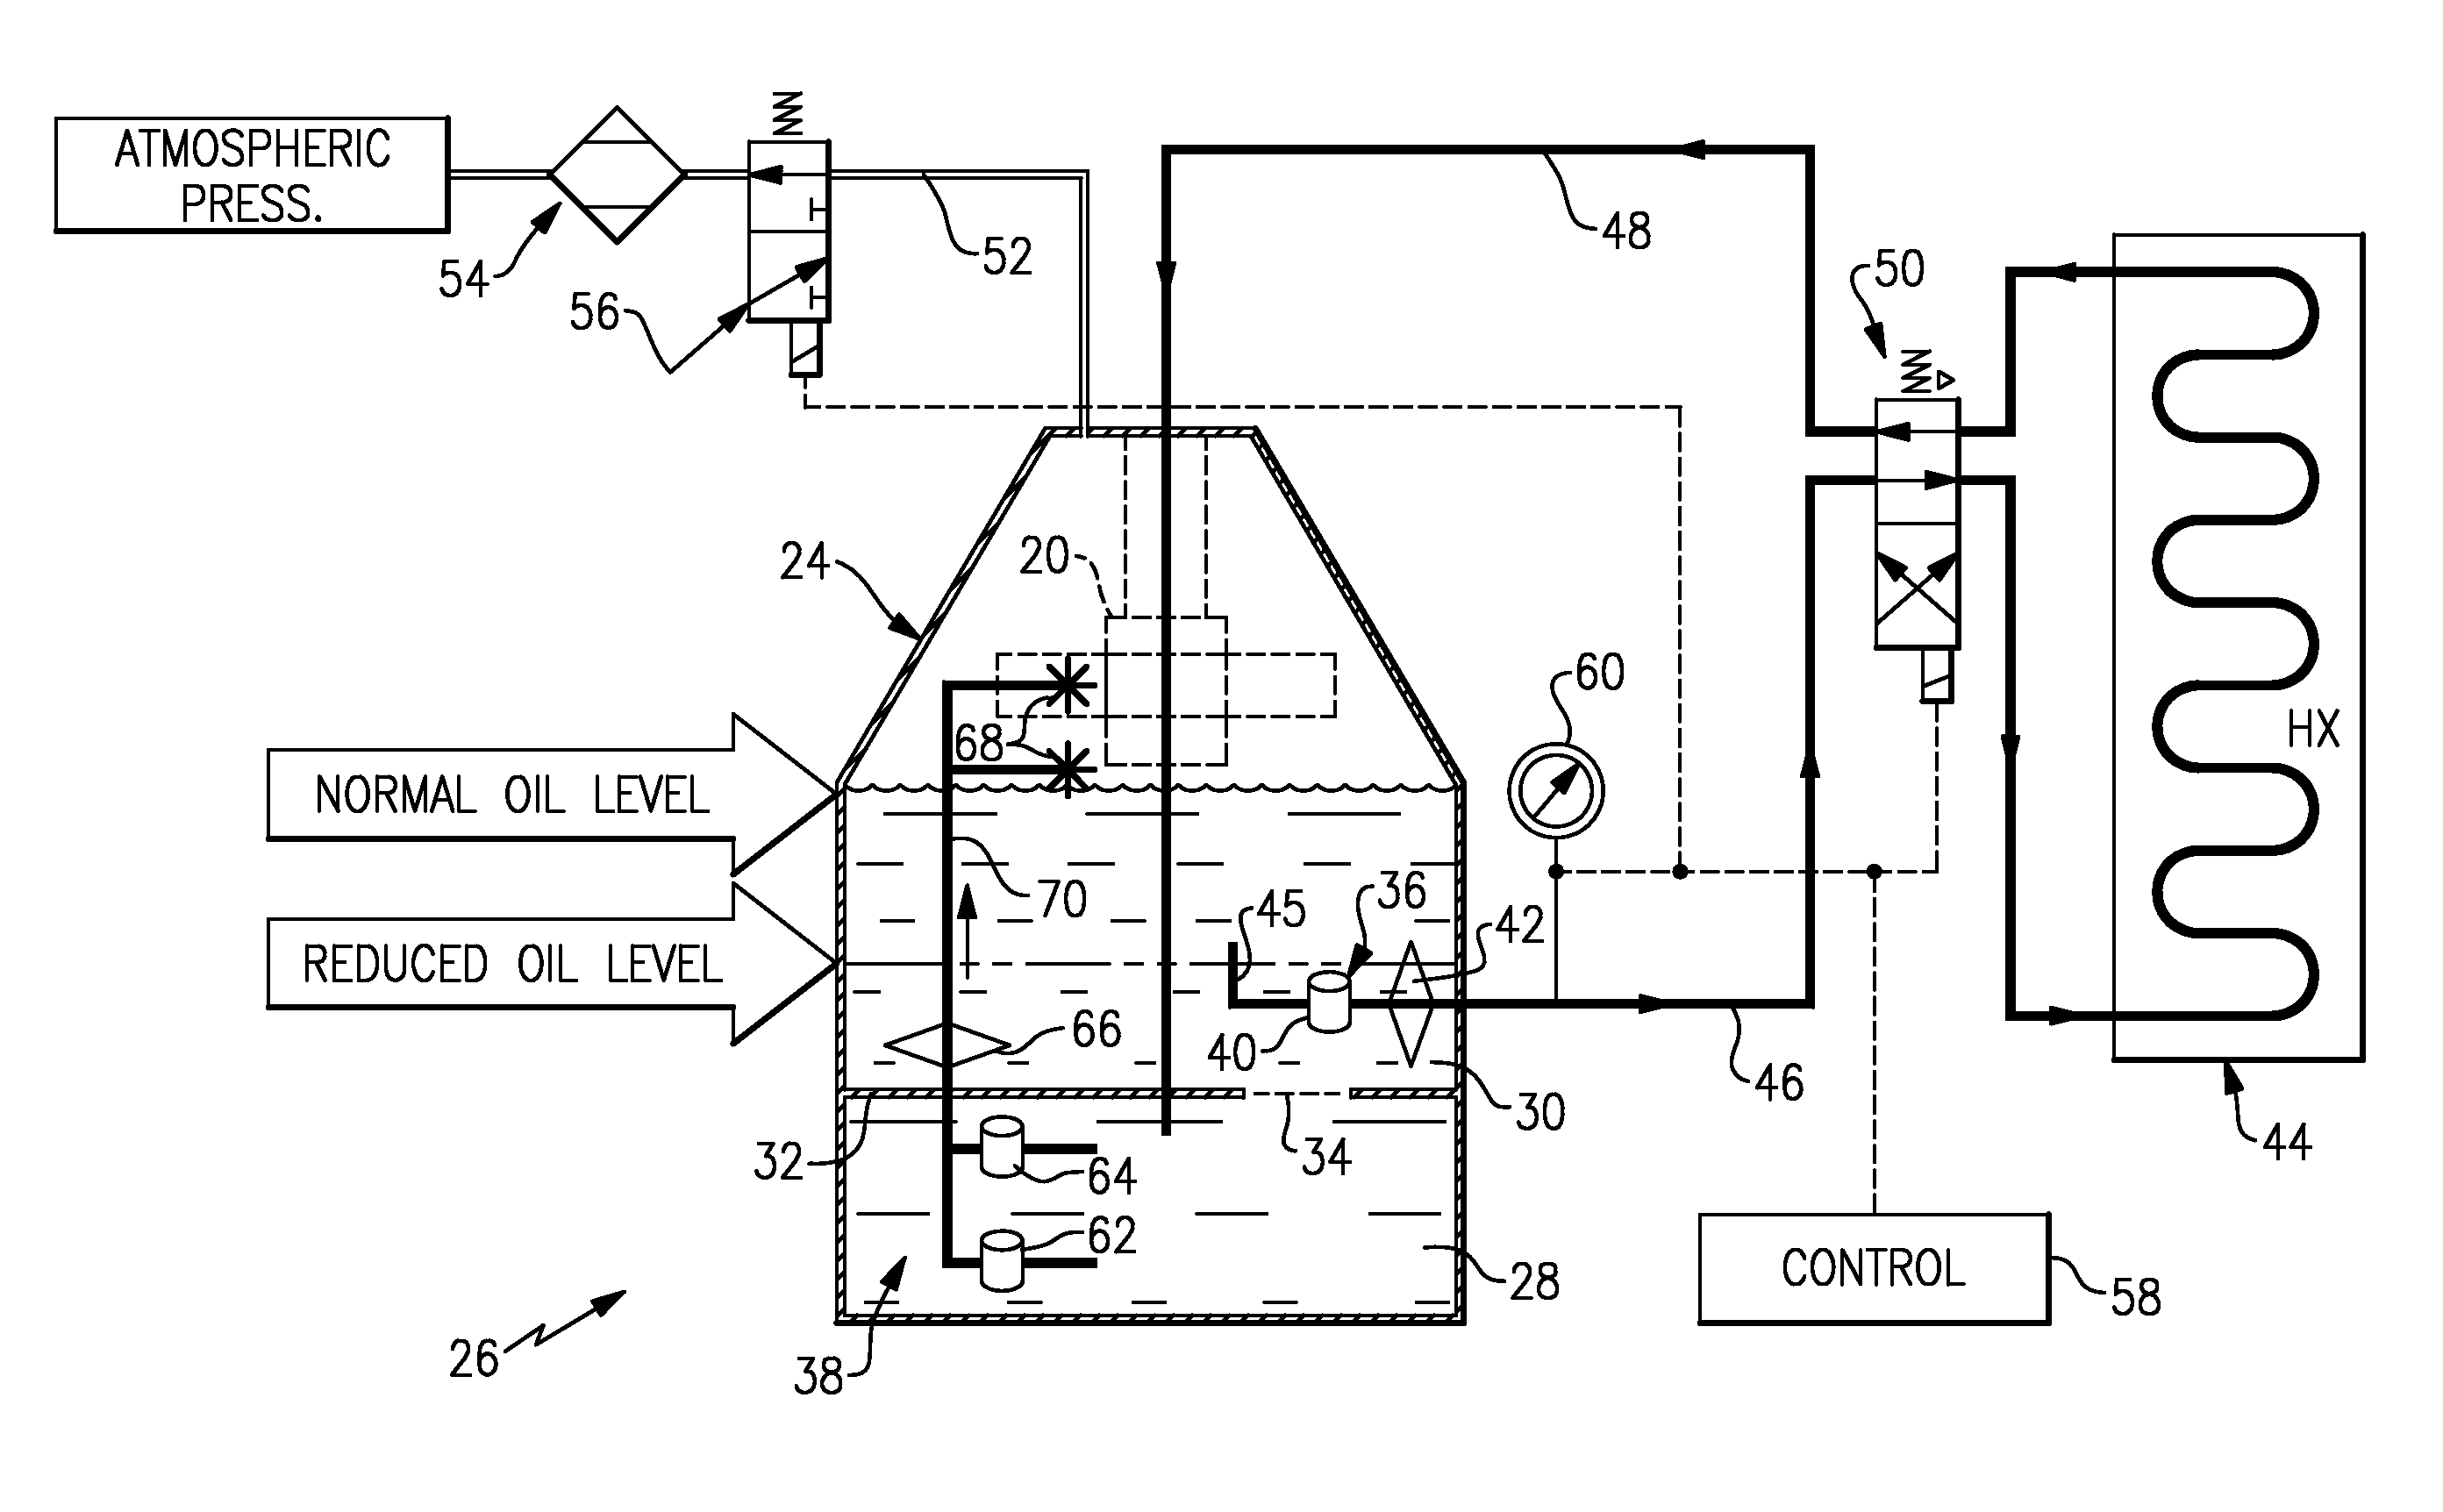 Lubrication system with prolonged loss of lubricant operation